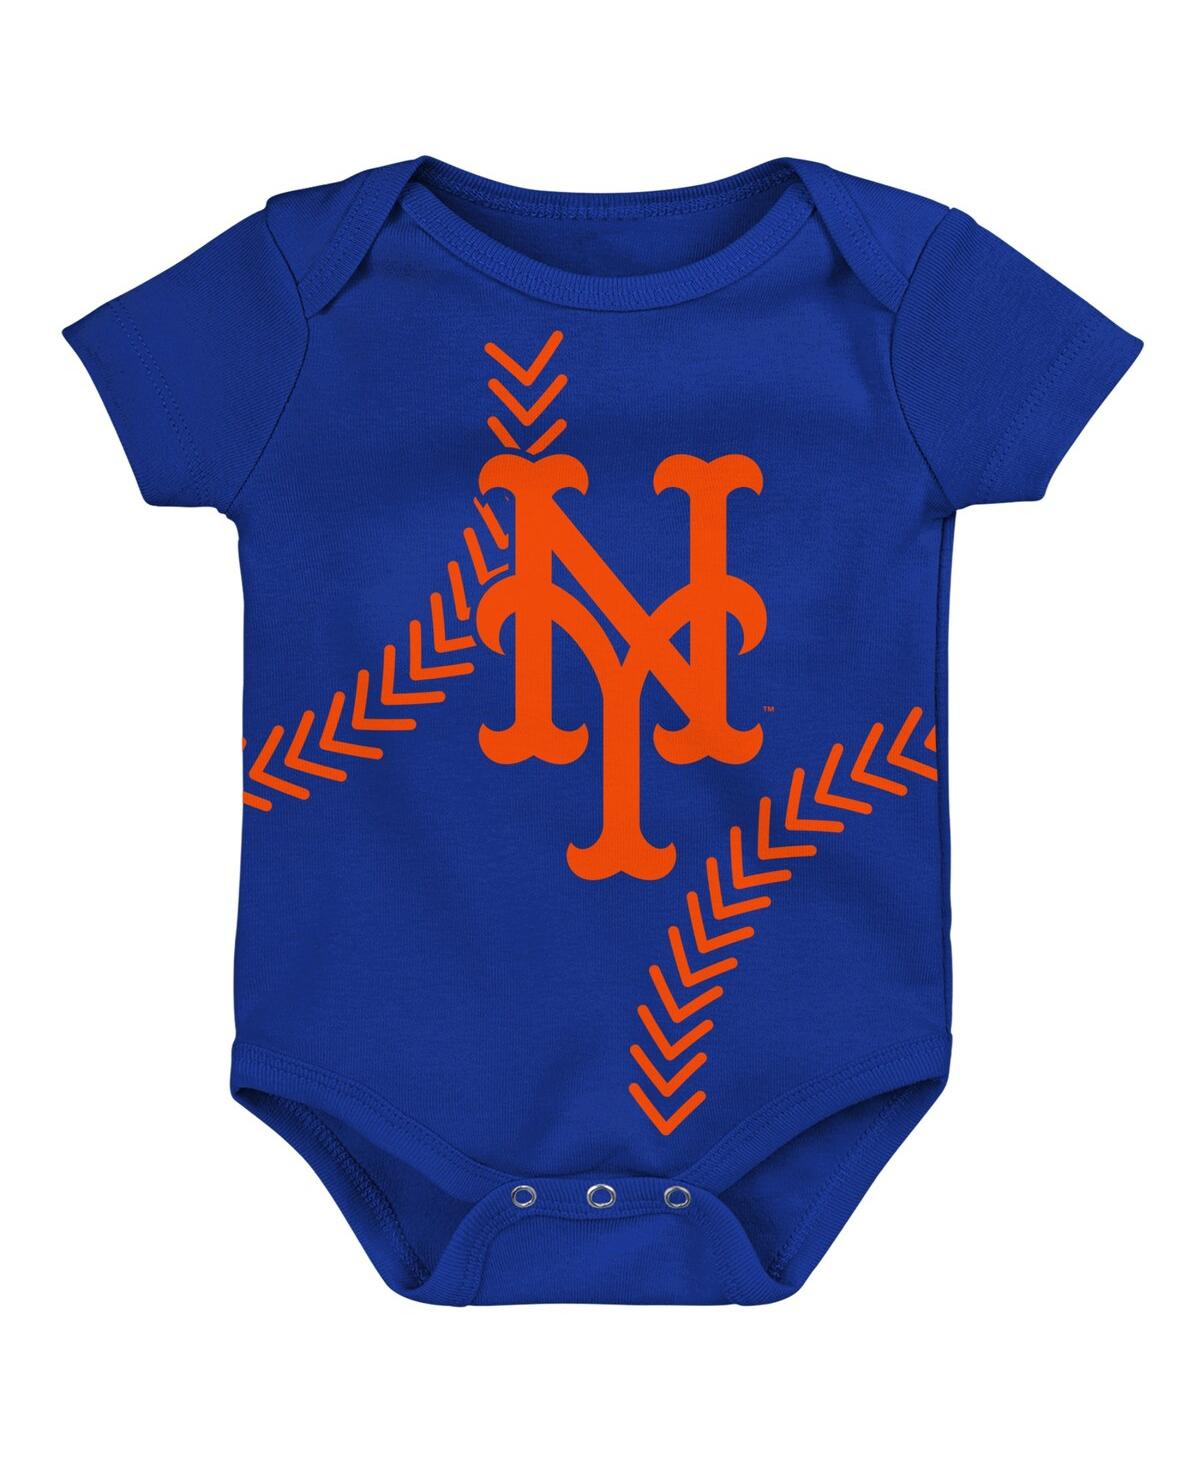 Outerstuff Babies' Newborn And Infant Boys And Girls Royal New York Mets Running Home Bodysuit